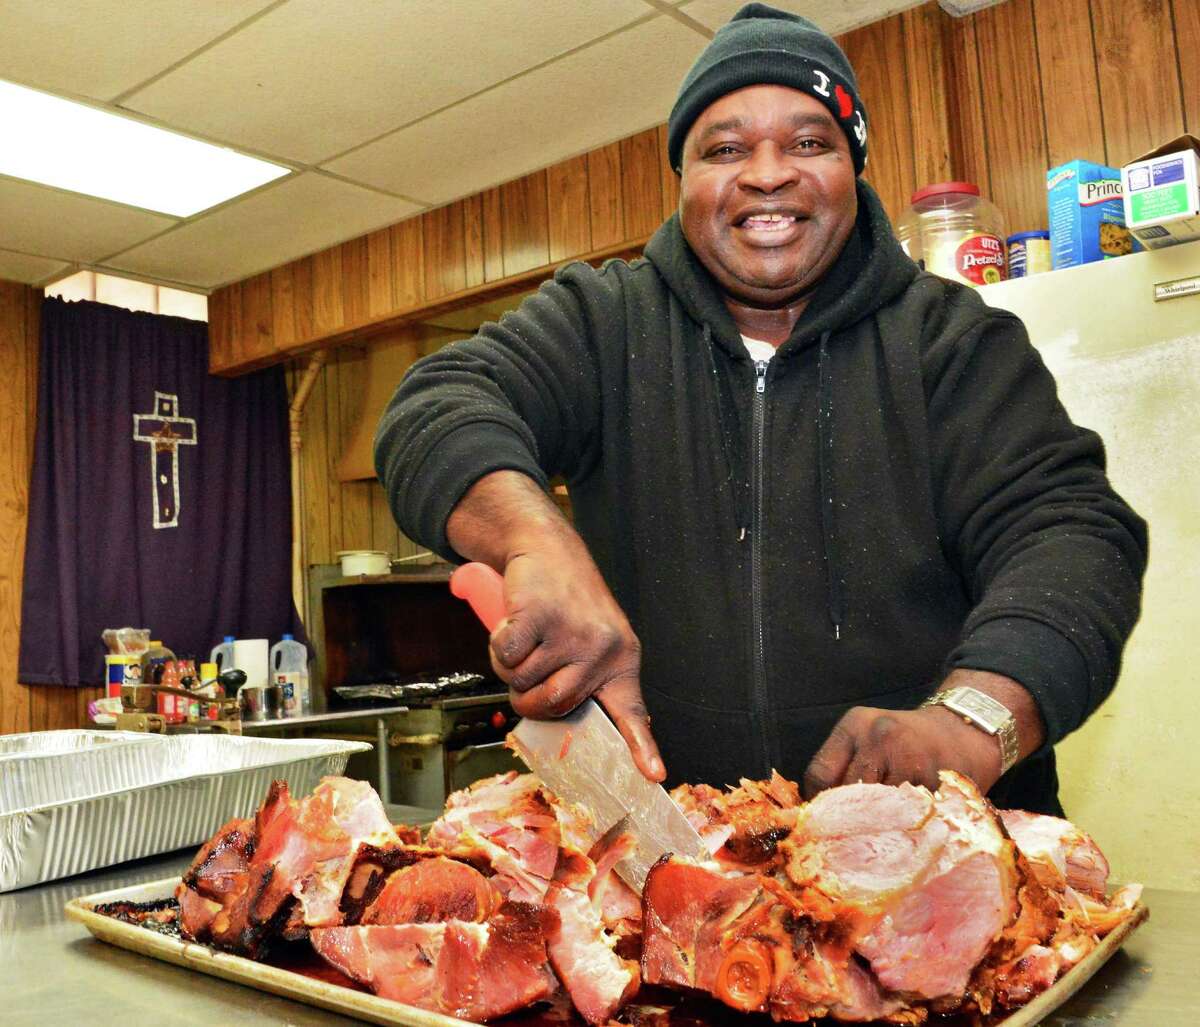 Pastor Willie Bacote carves up hams and pork roast butts in preparation for Thanksgiving Tuesday Nov. 19, 2013, in Troy, NY. (John Carl D'Annibale / Times Union)